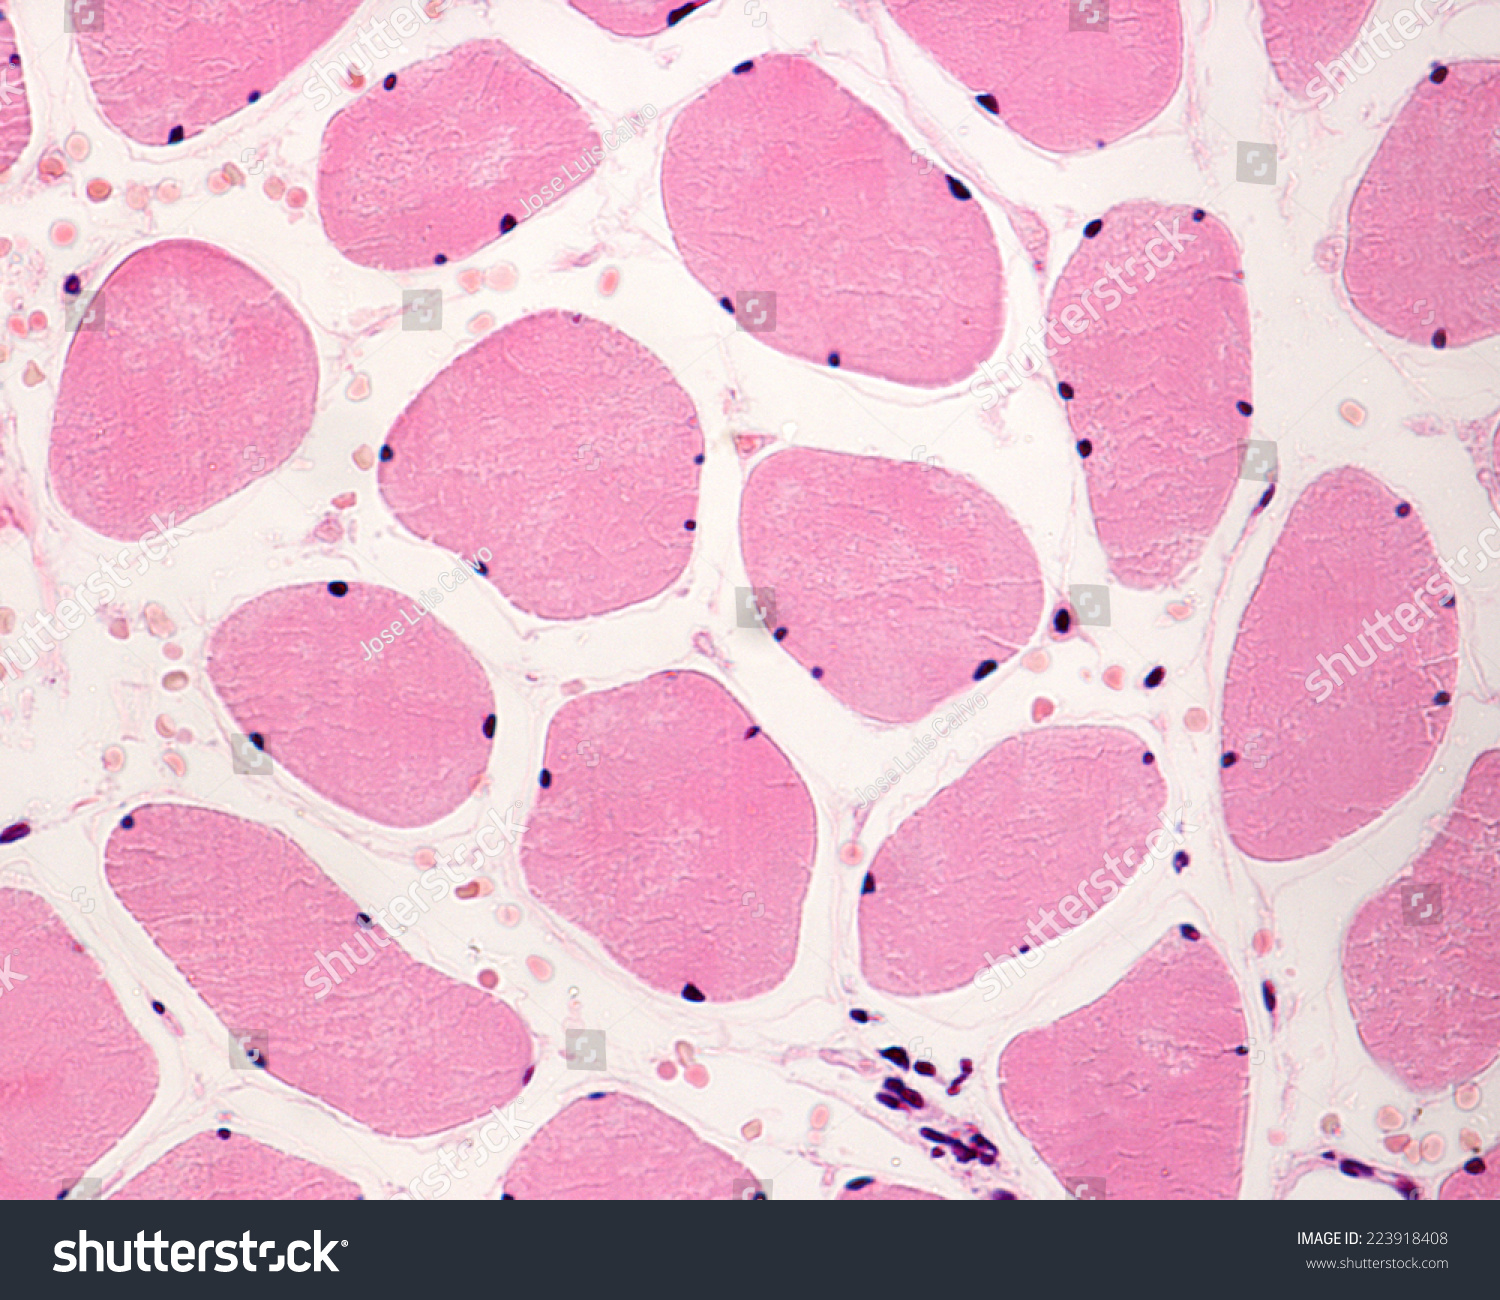 Skeletal striated muscle fibers in cross section showing the presence of several nuclei (multinucleated cells) located in the cell periphery. Light microscope photomicrograph #223918408